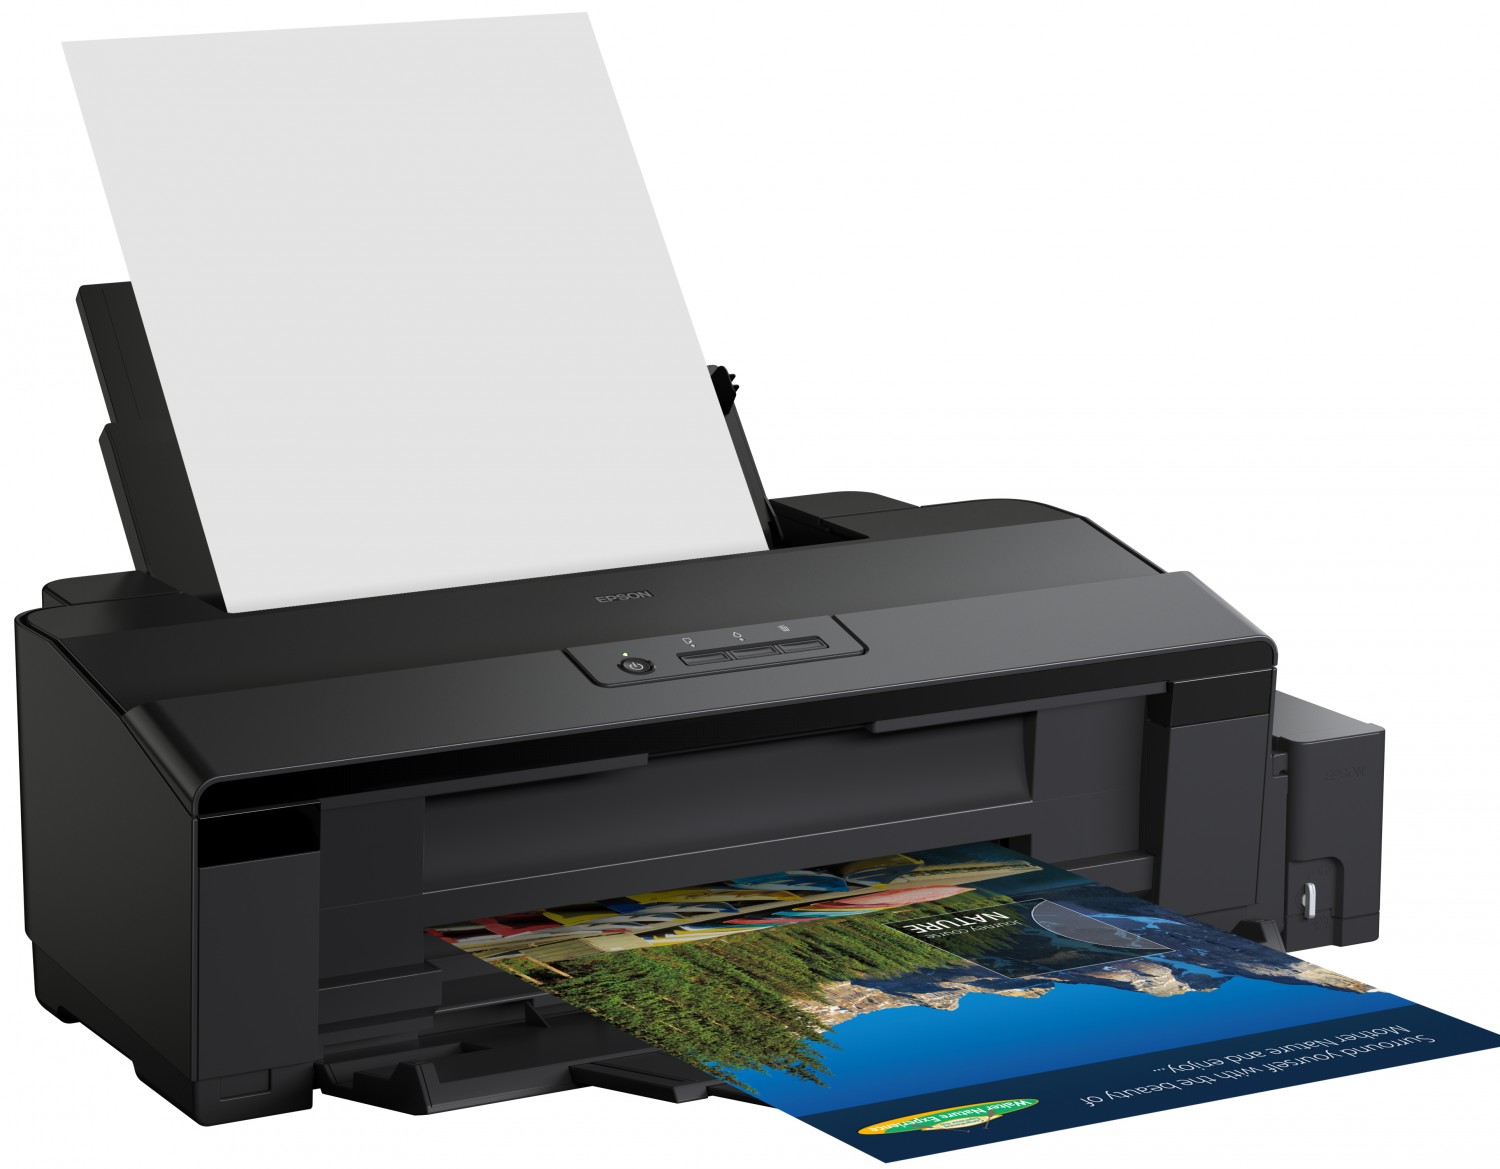 Manually Install a Printer on Your Mac - Lifewire